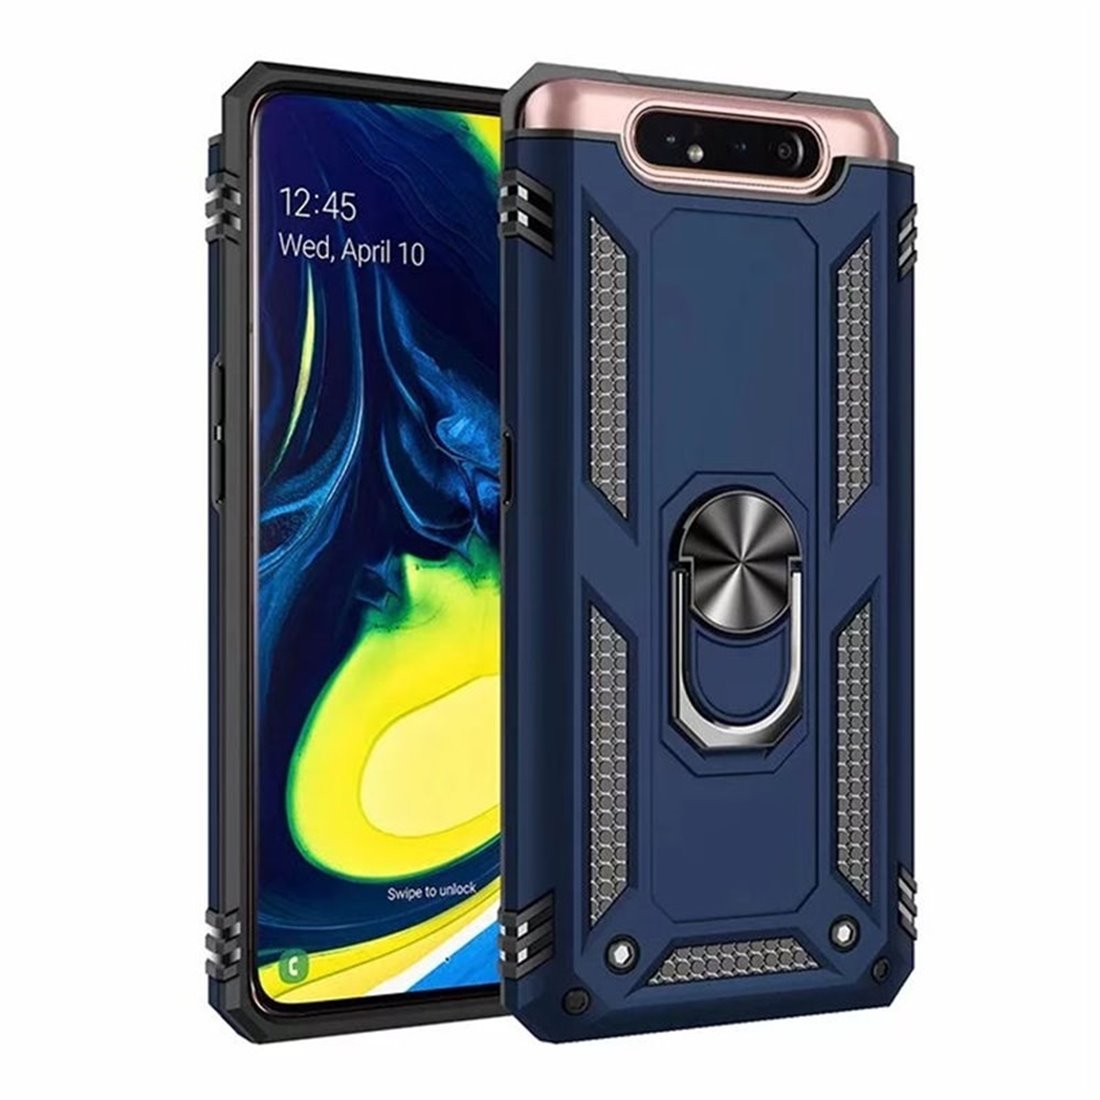 Samsung Galaxy A80/A90 Plastic Blue Back Cover - Solid ring